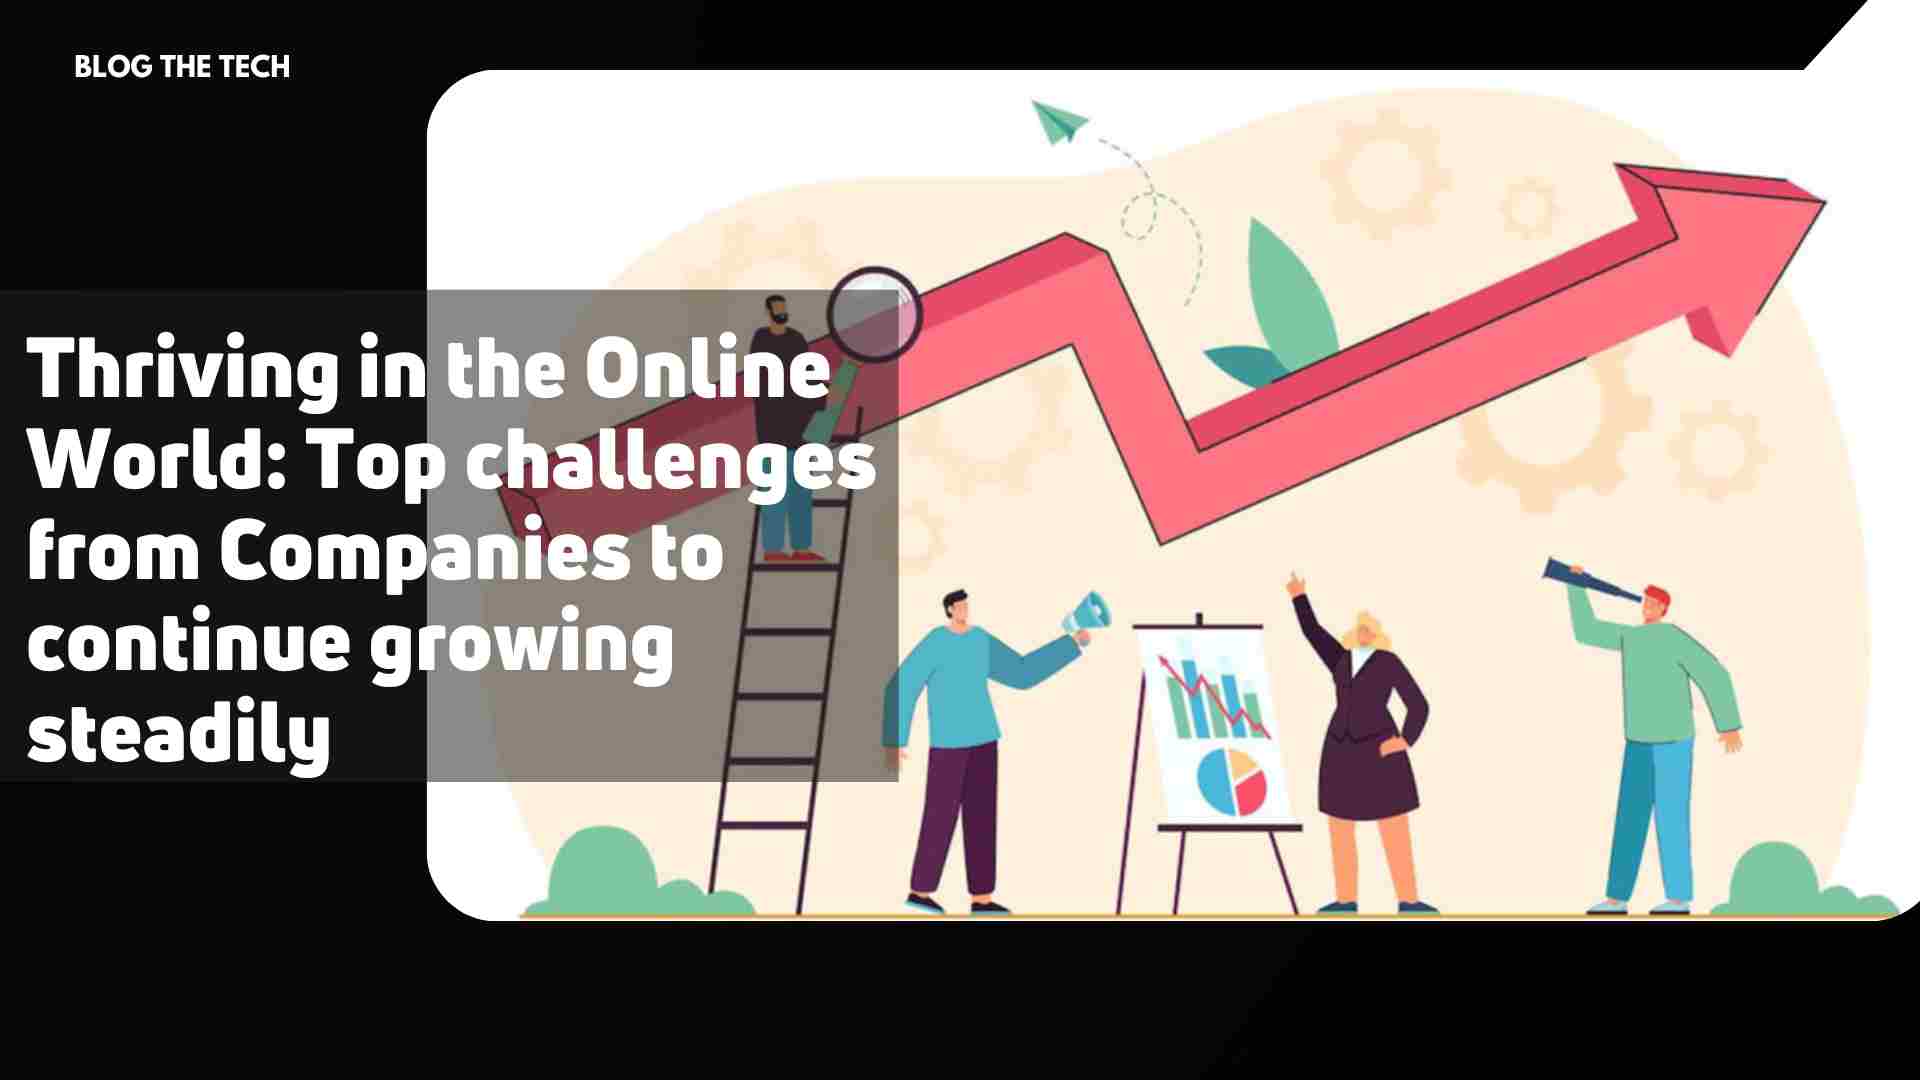 Thriving in the Online World: Top challenges from Companies to continue growing steadily